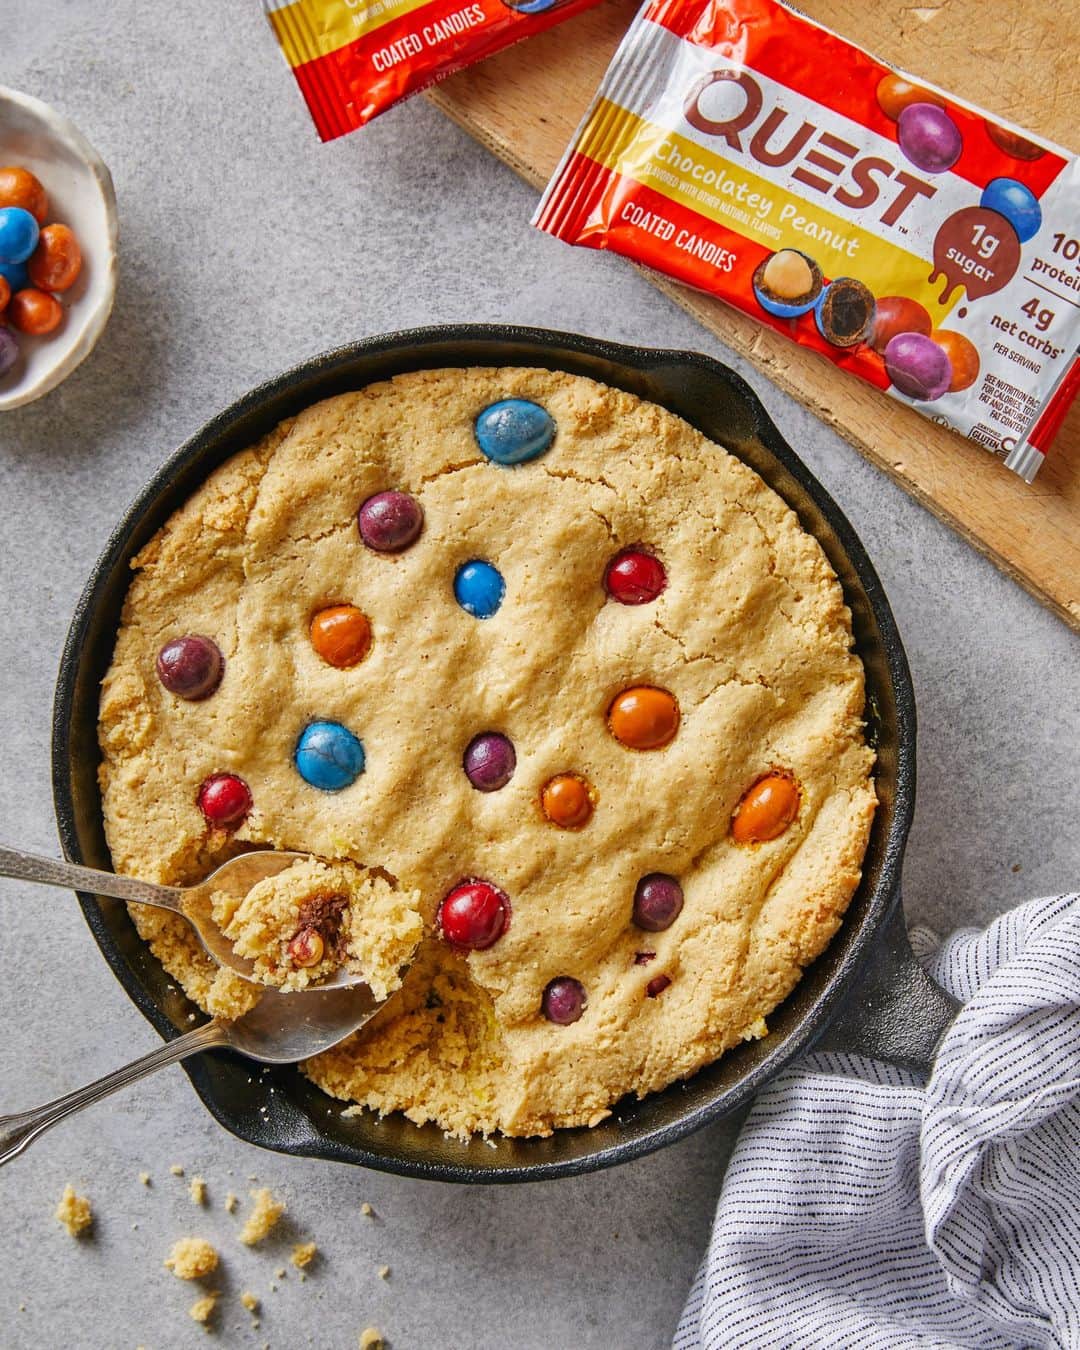 questnutritionのインスタグラム：「Questified Peanut Butter Skillet Cookie with Coated Candies 💪🍪🍬😍🔥 • 👉 FULL RECIPE LINK IN BIO (swipe left to 2nd card)👈 • Per serving: 9g protein, 7g carb, 12g fat. (4g net carbs) #OnaQuest #QuestNutrition #QuestCandy」